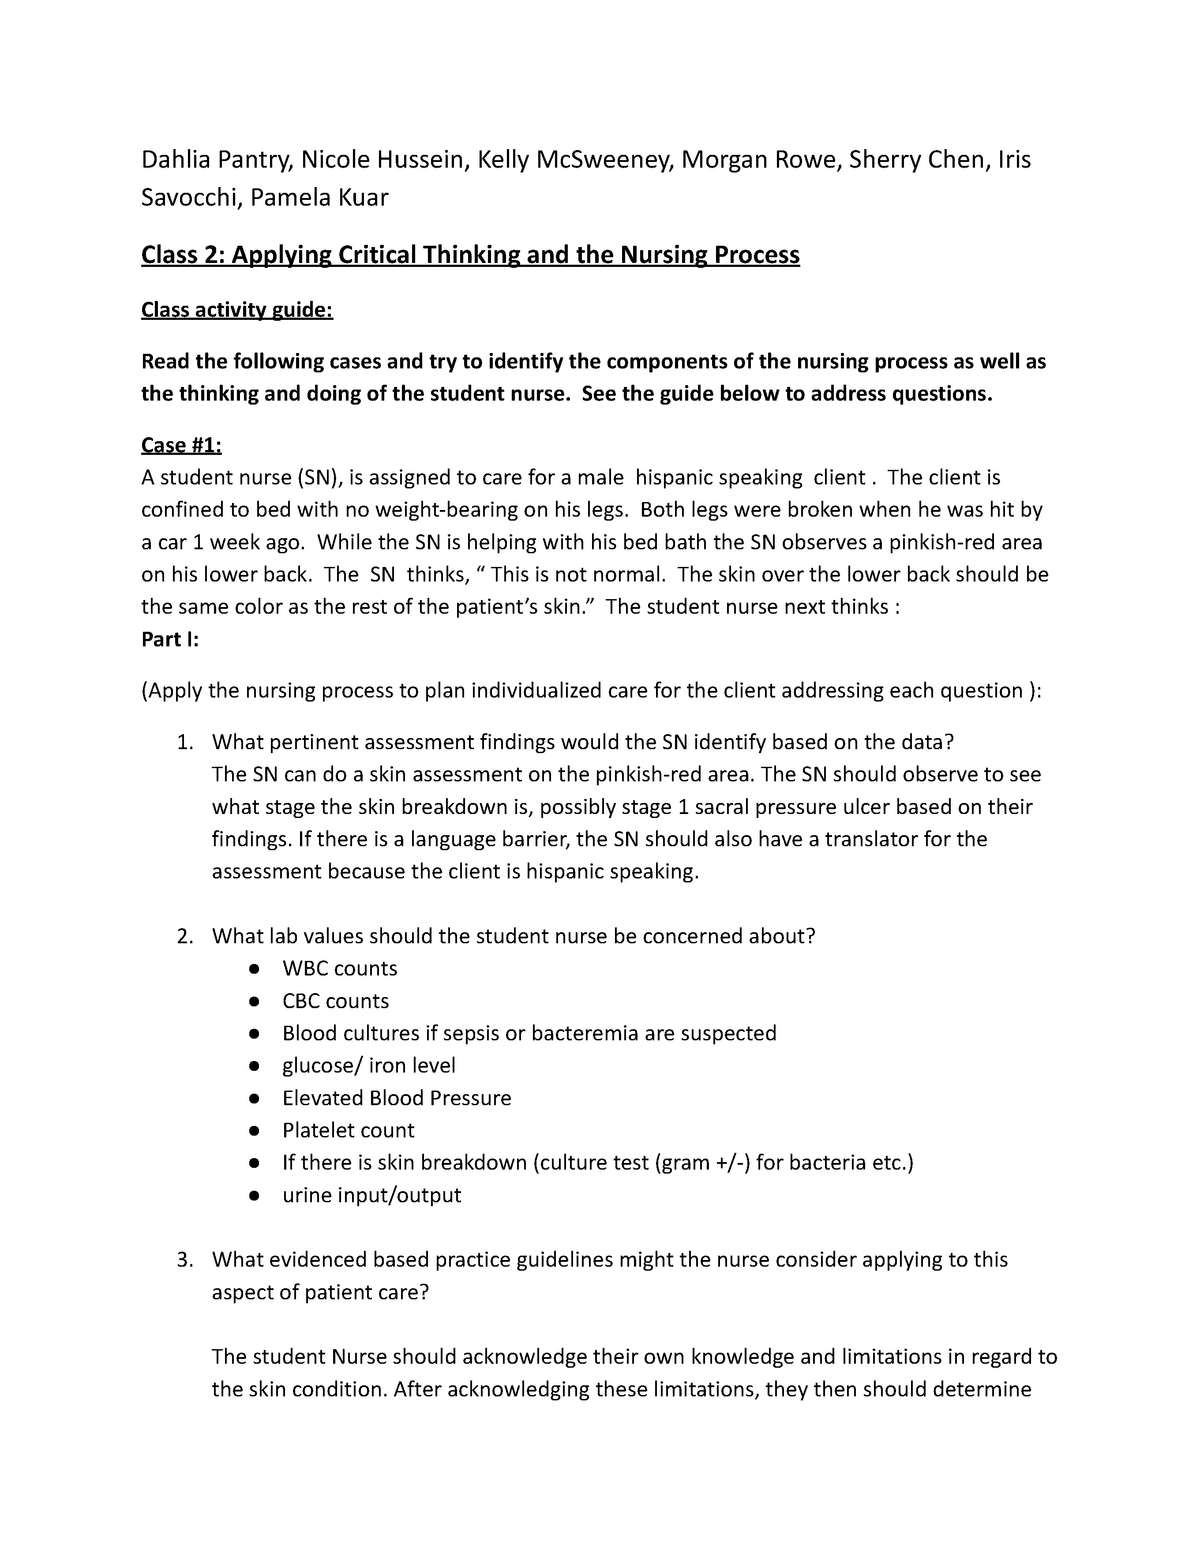 critical thinking research case study